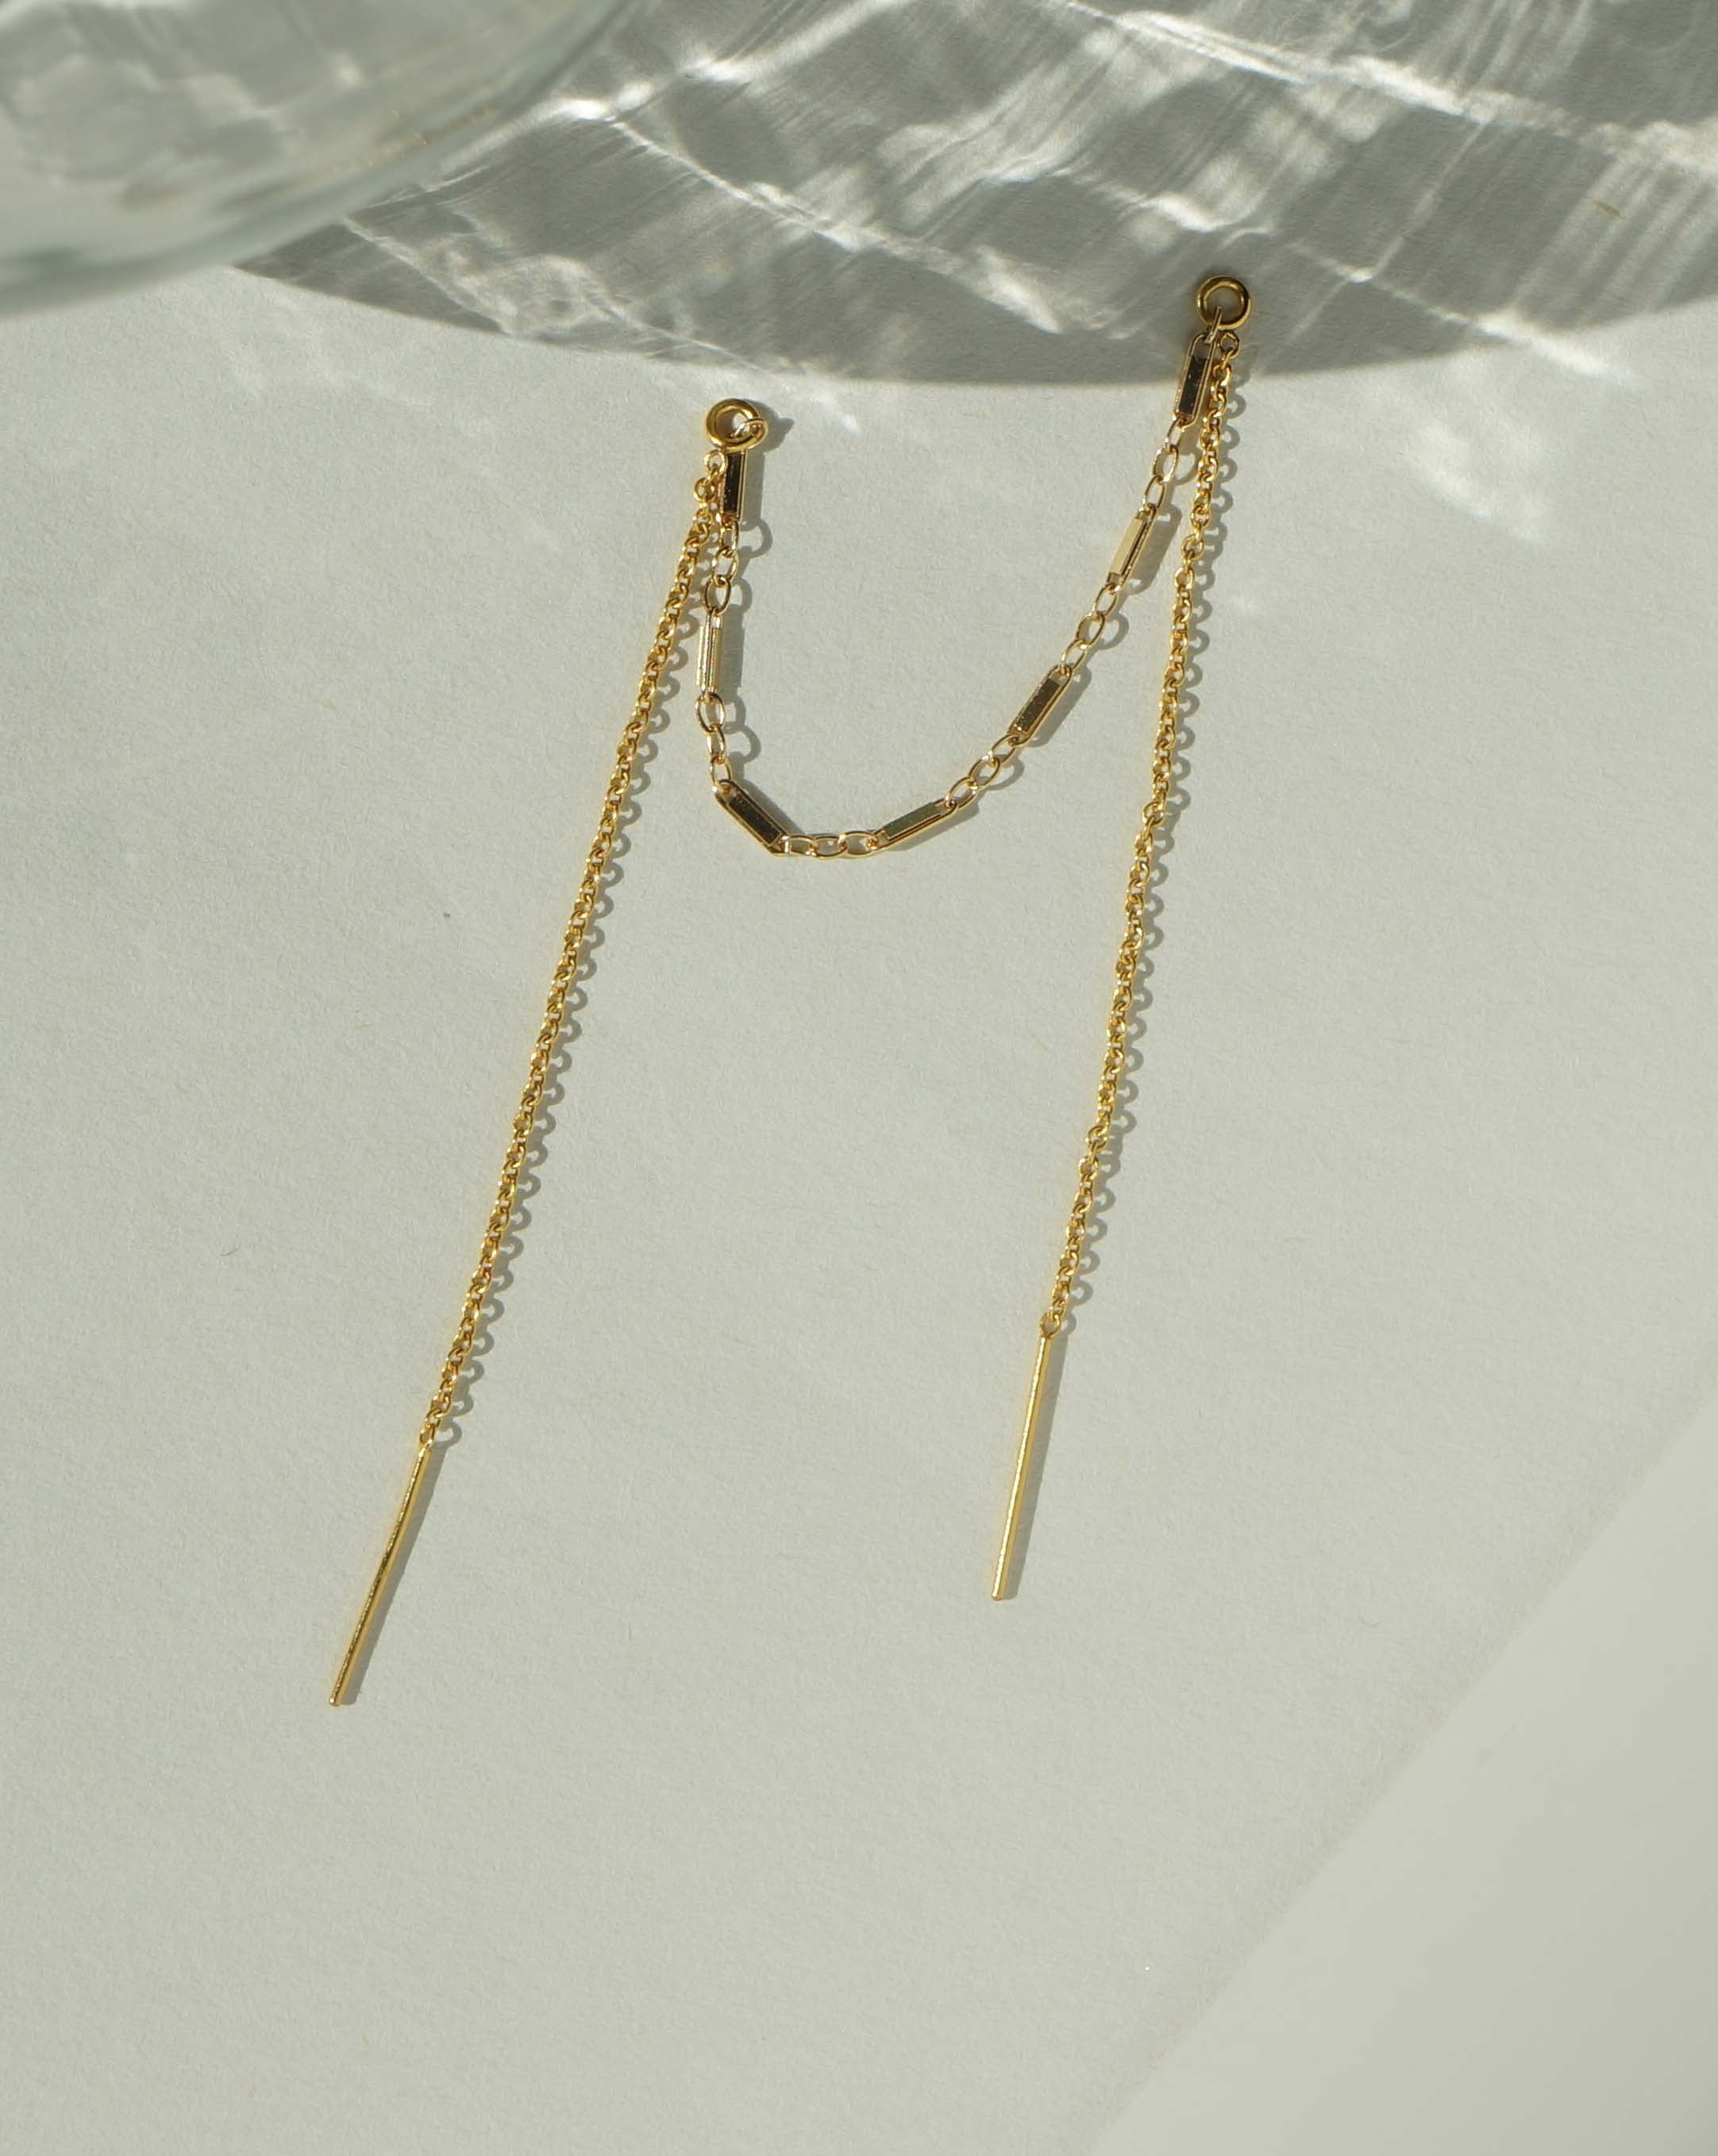 Piper Threader by KOZAKH. A long threader climber earring for 2 or more piercings, crafted in 14K Gold Filled.